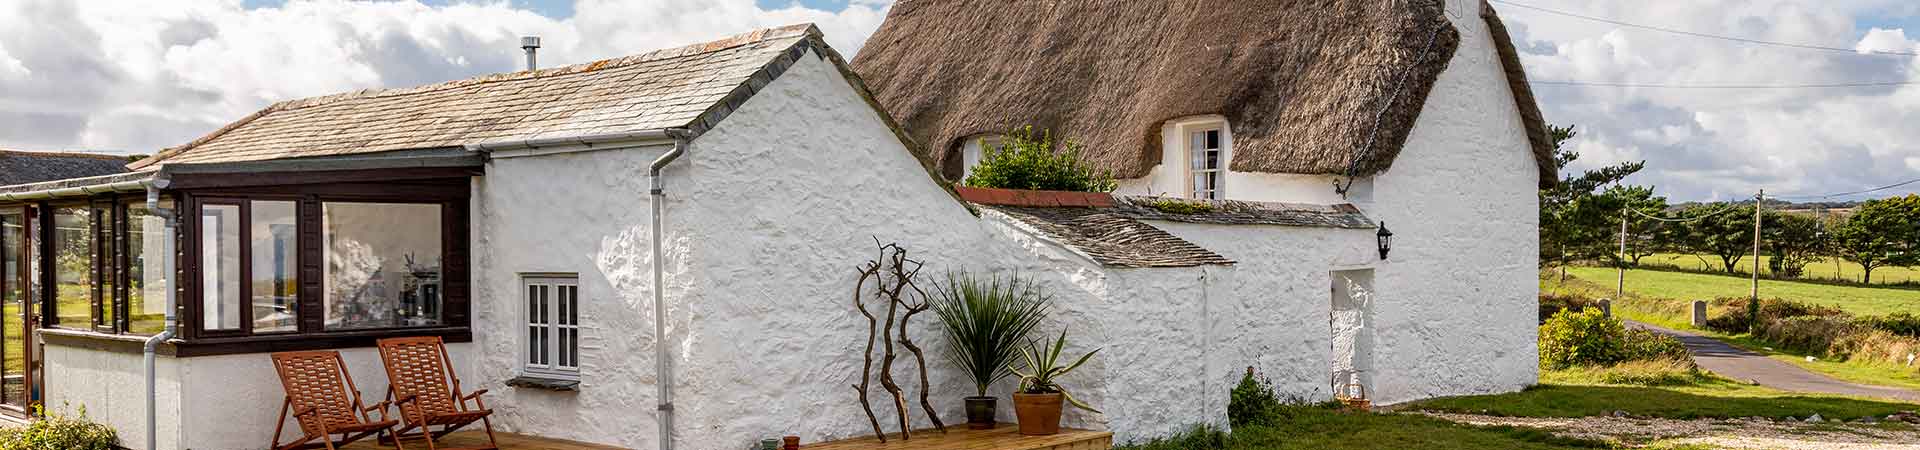 Thatched holiday cottages in Central England